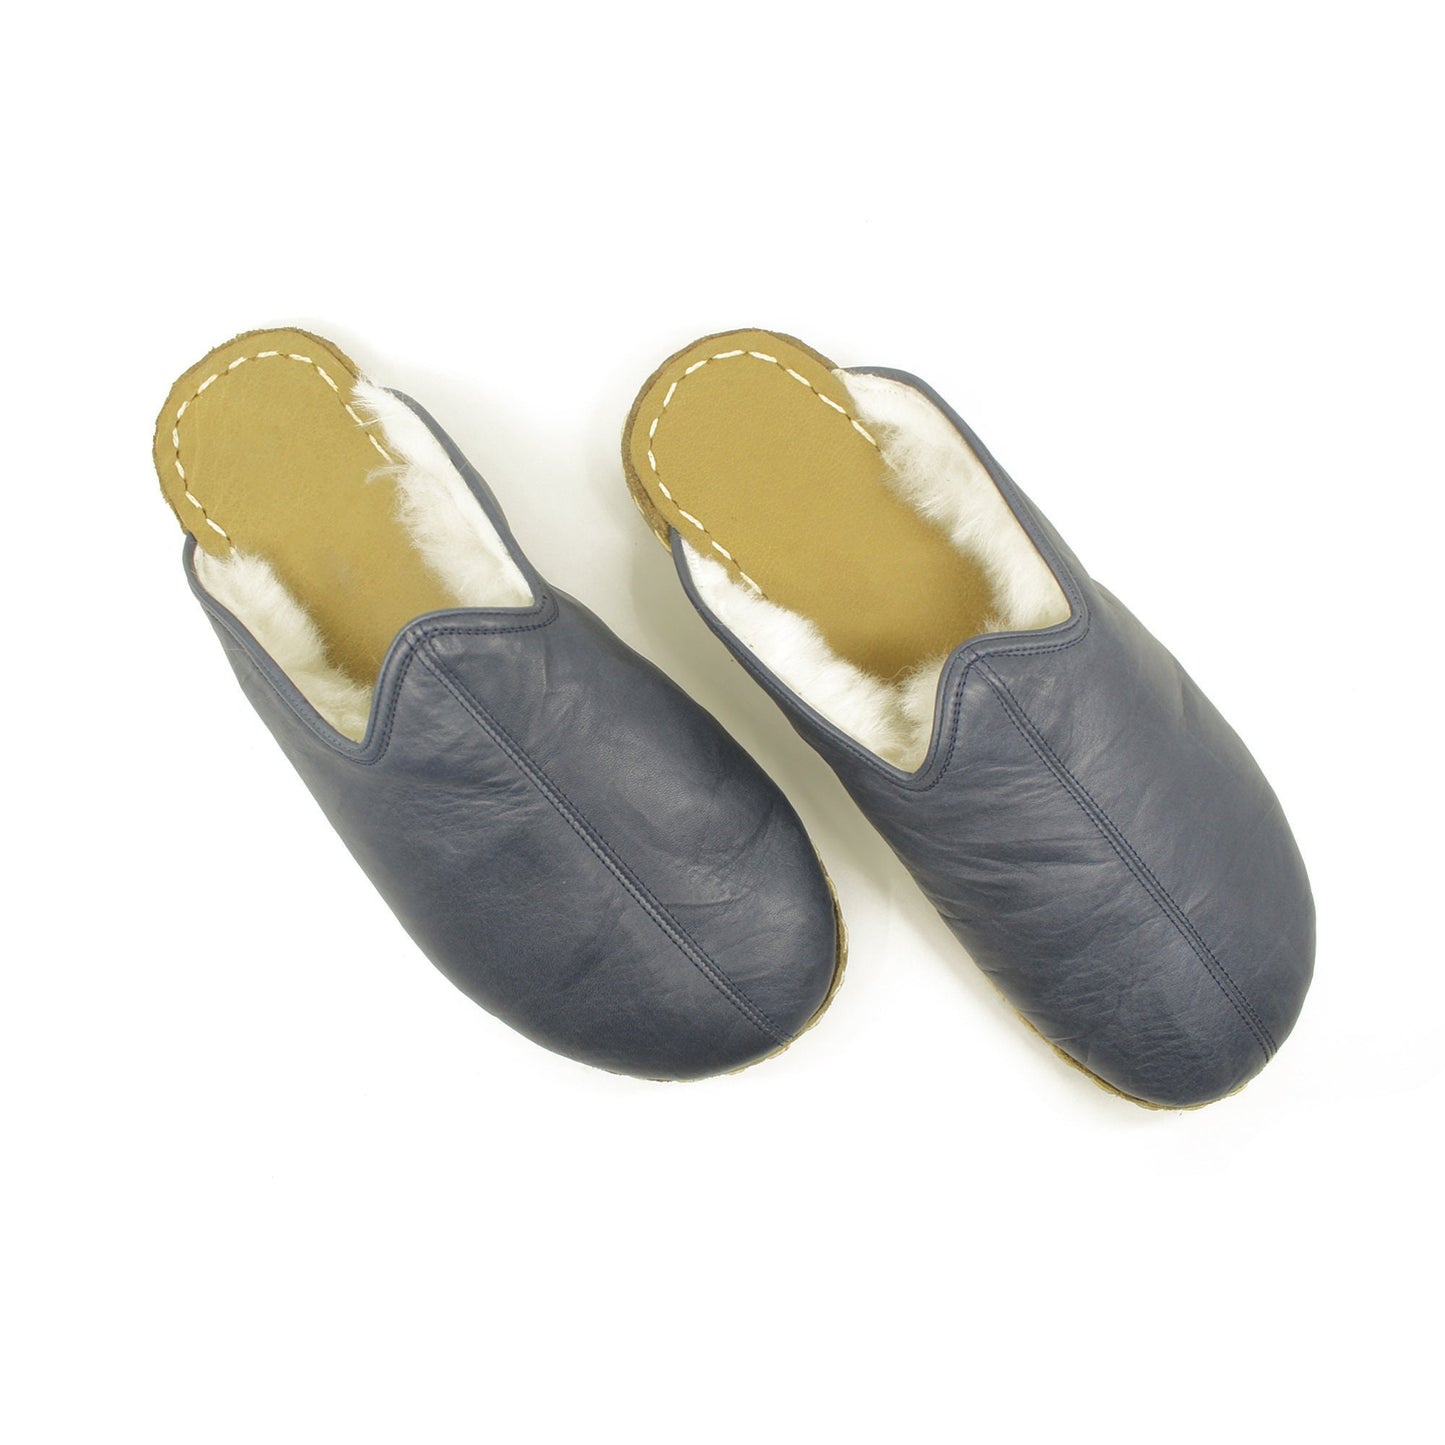 Shearling Leather Slippers For Women - Nefes Shoes